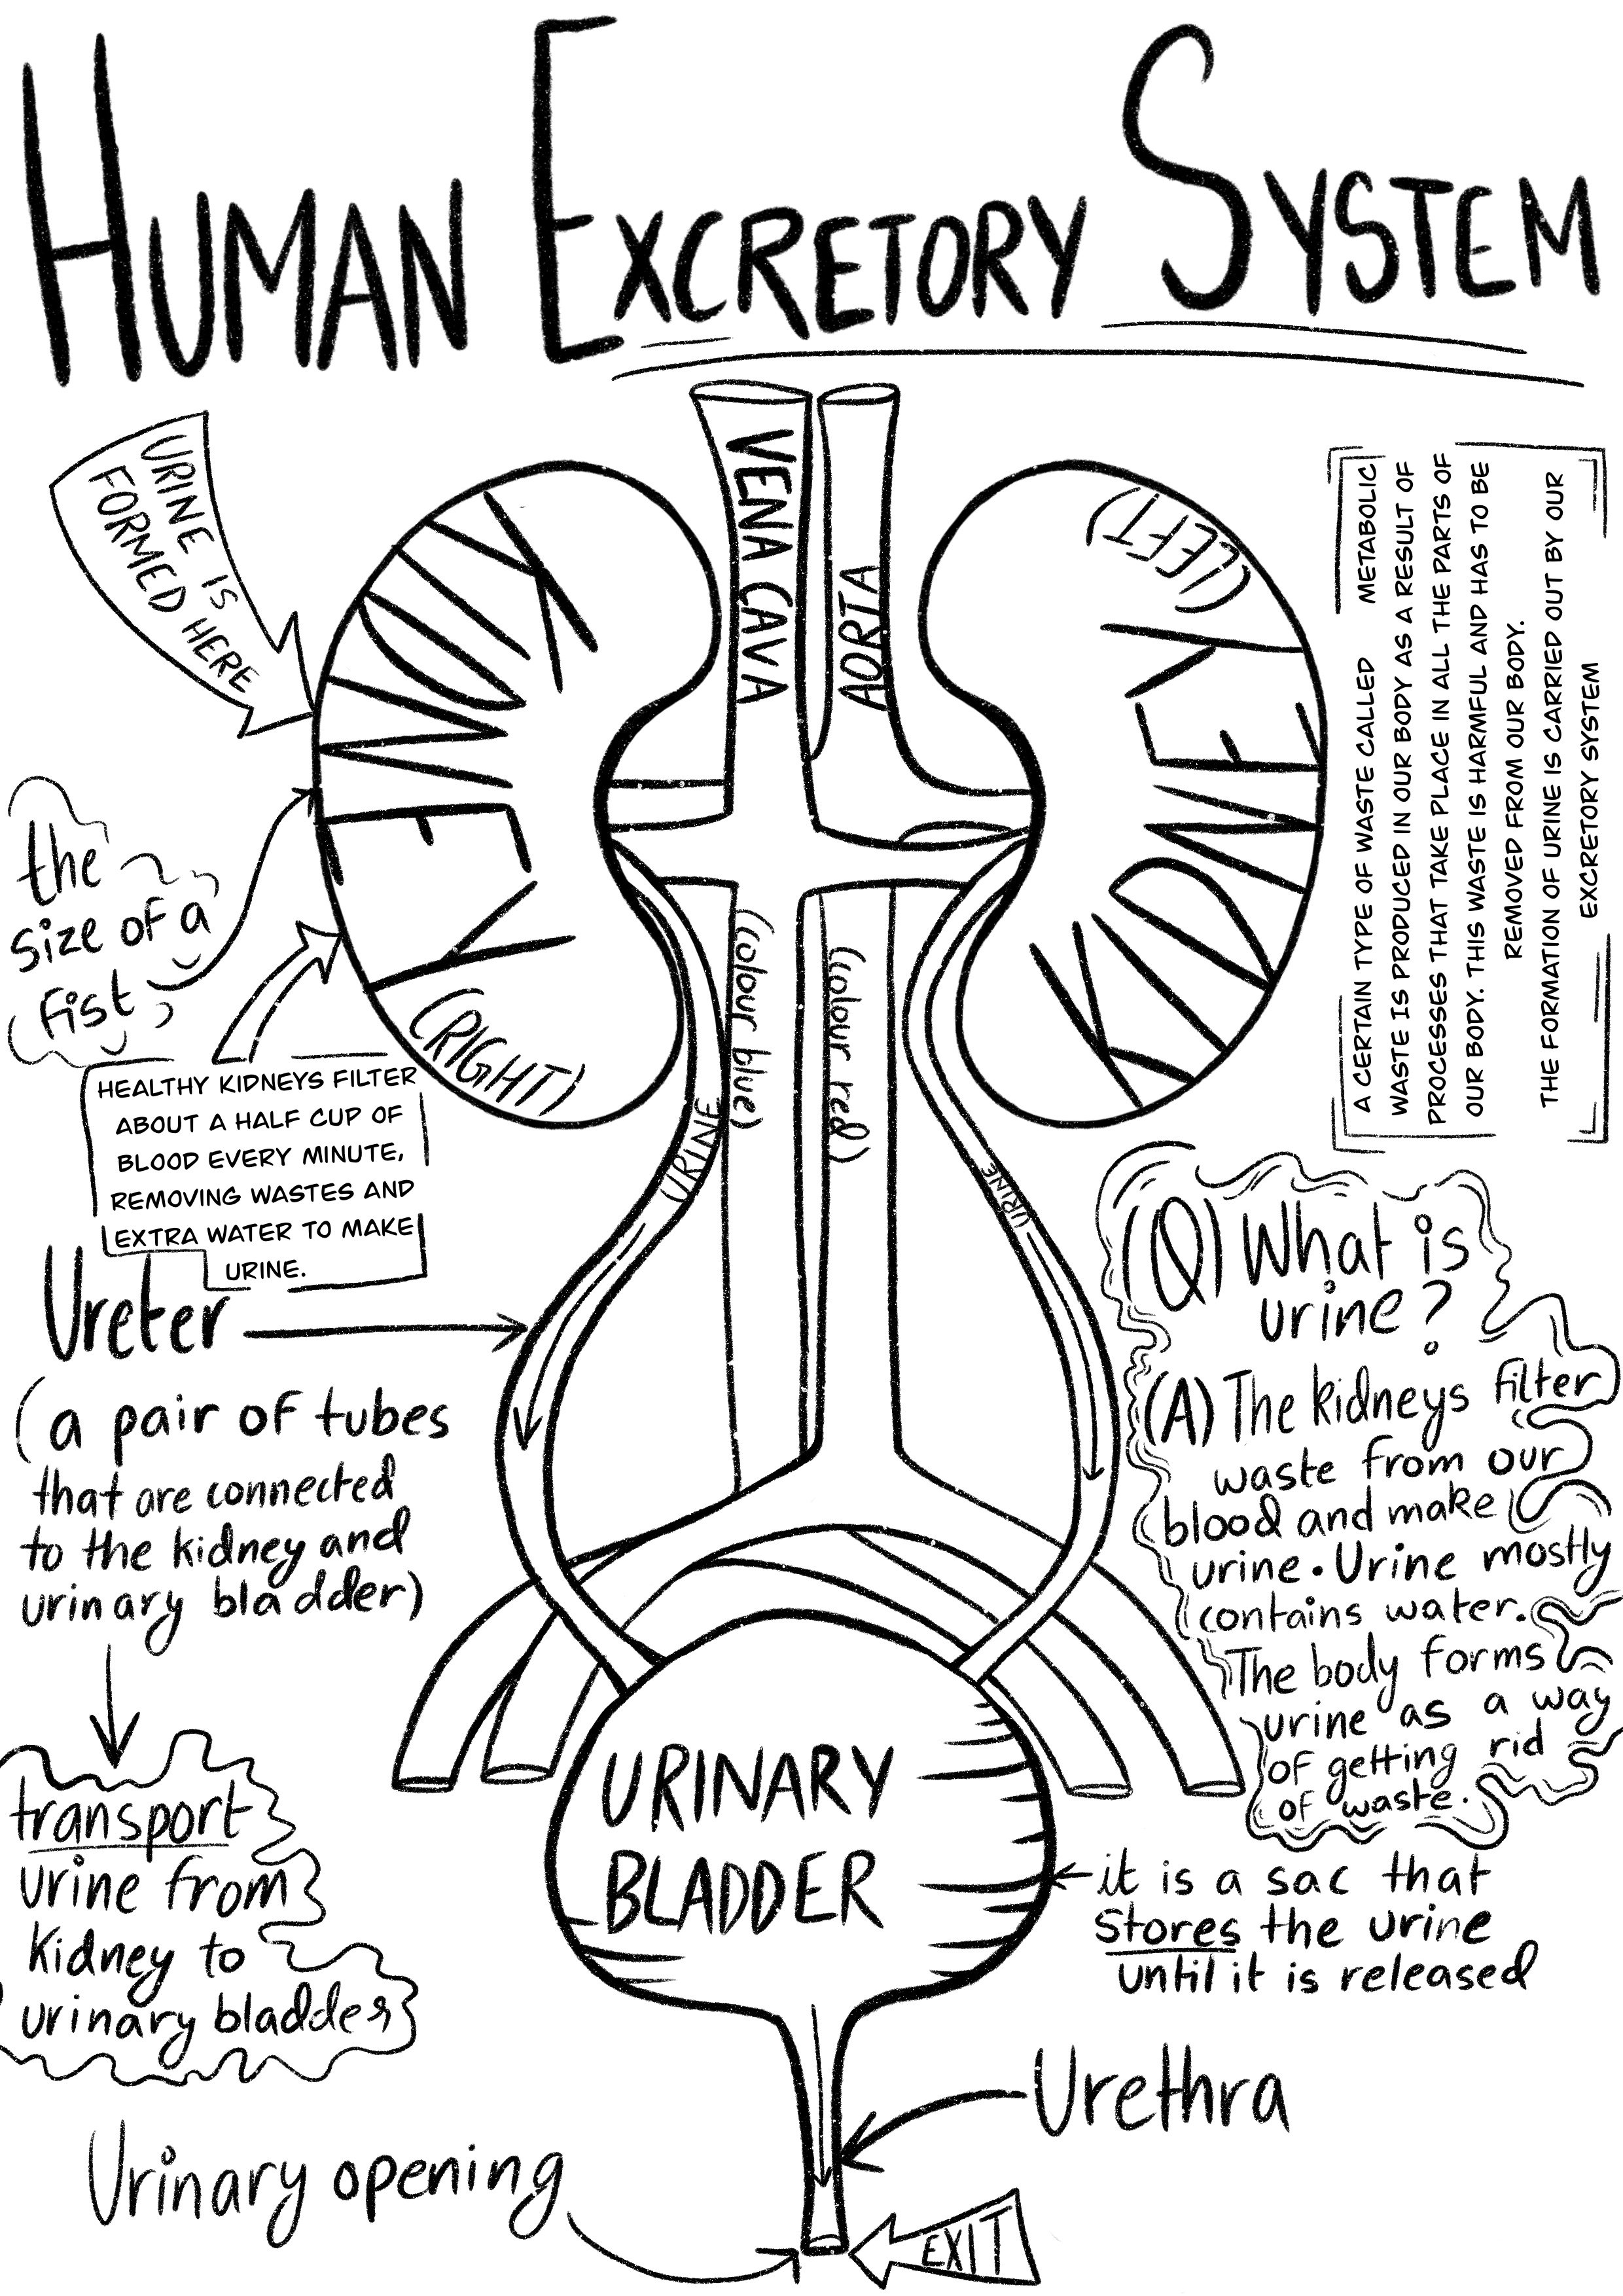 The clean machine - the excretory system doodle coloring printable | Mysite